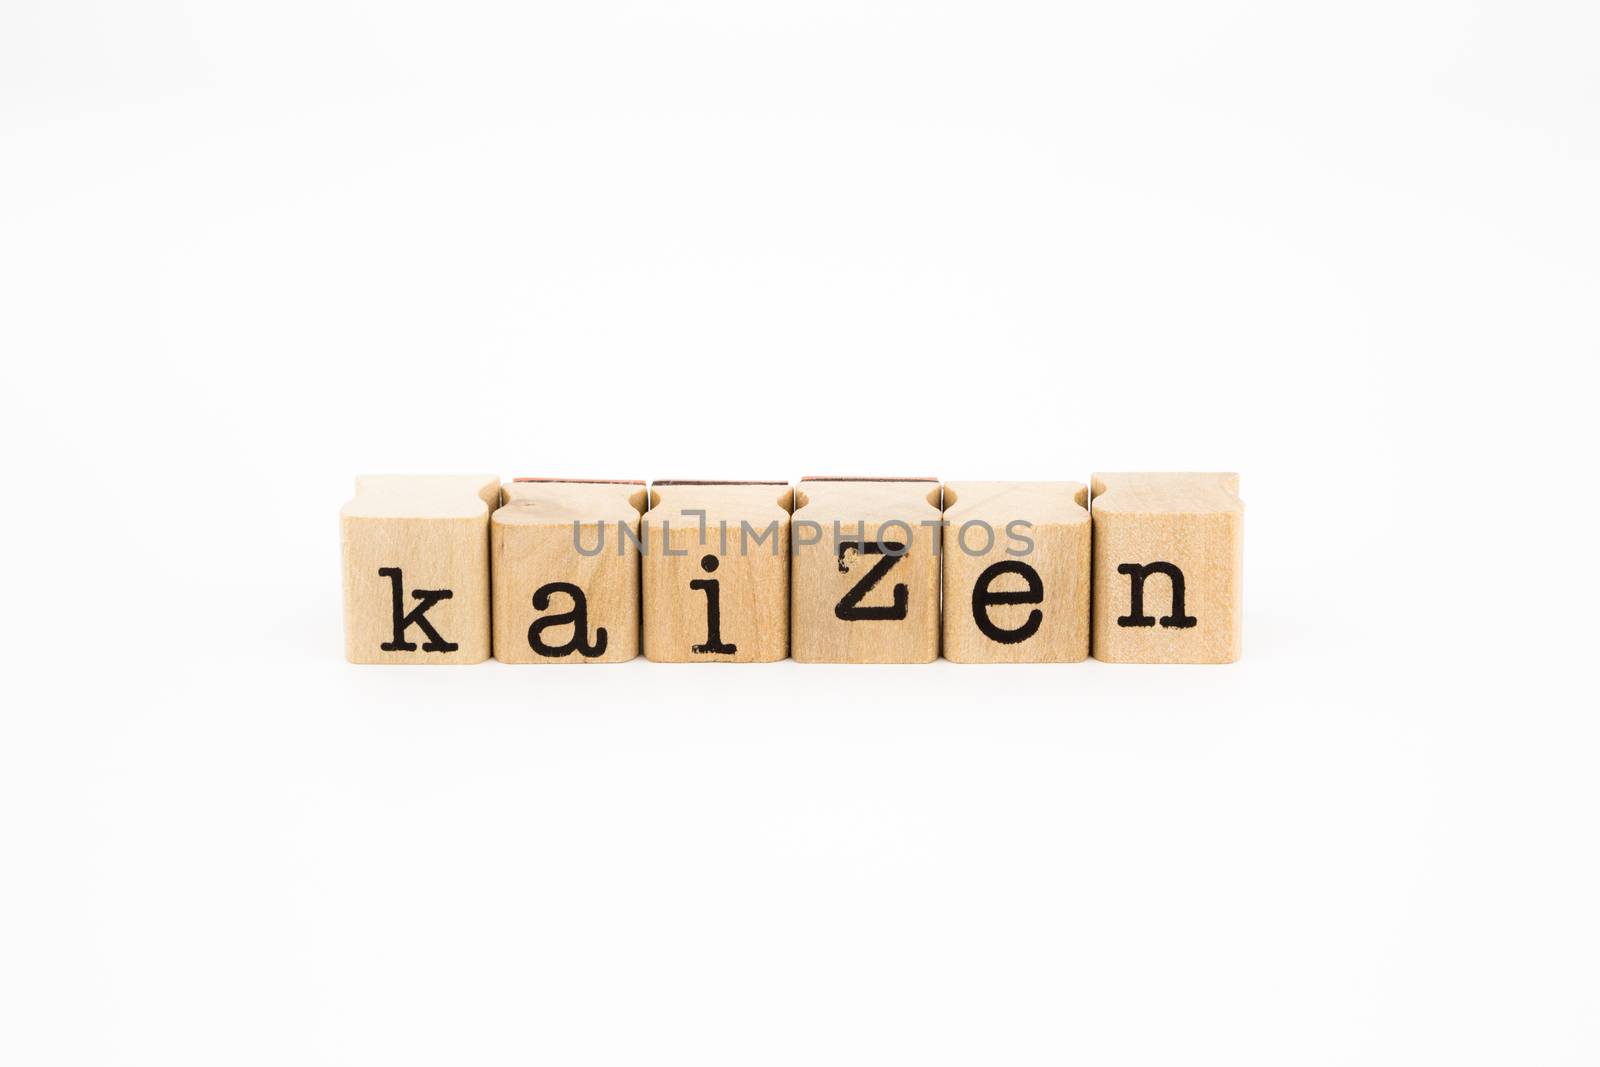 closeup kaizen wording isolate on white background, business and productivity concept and idea